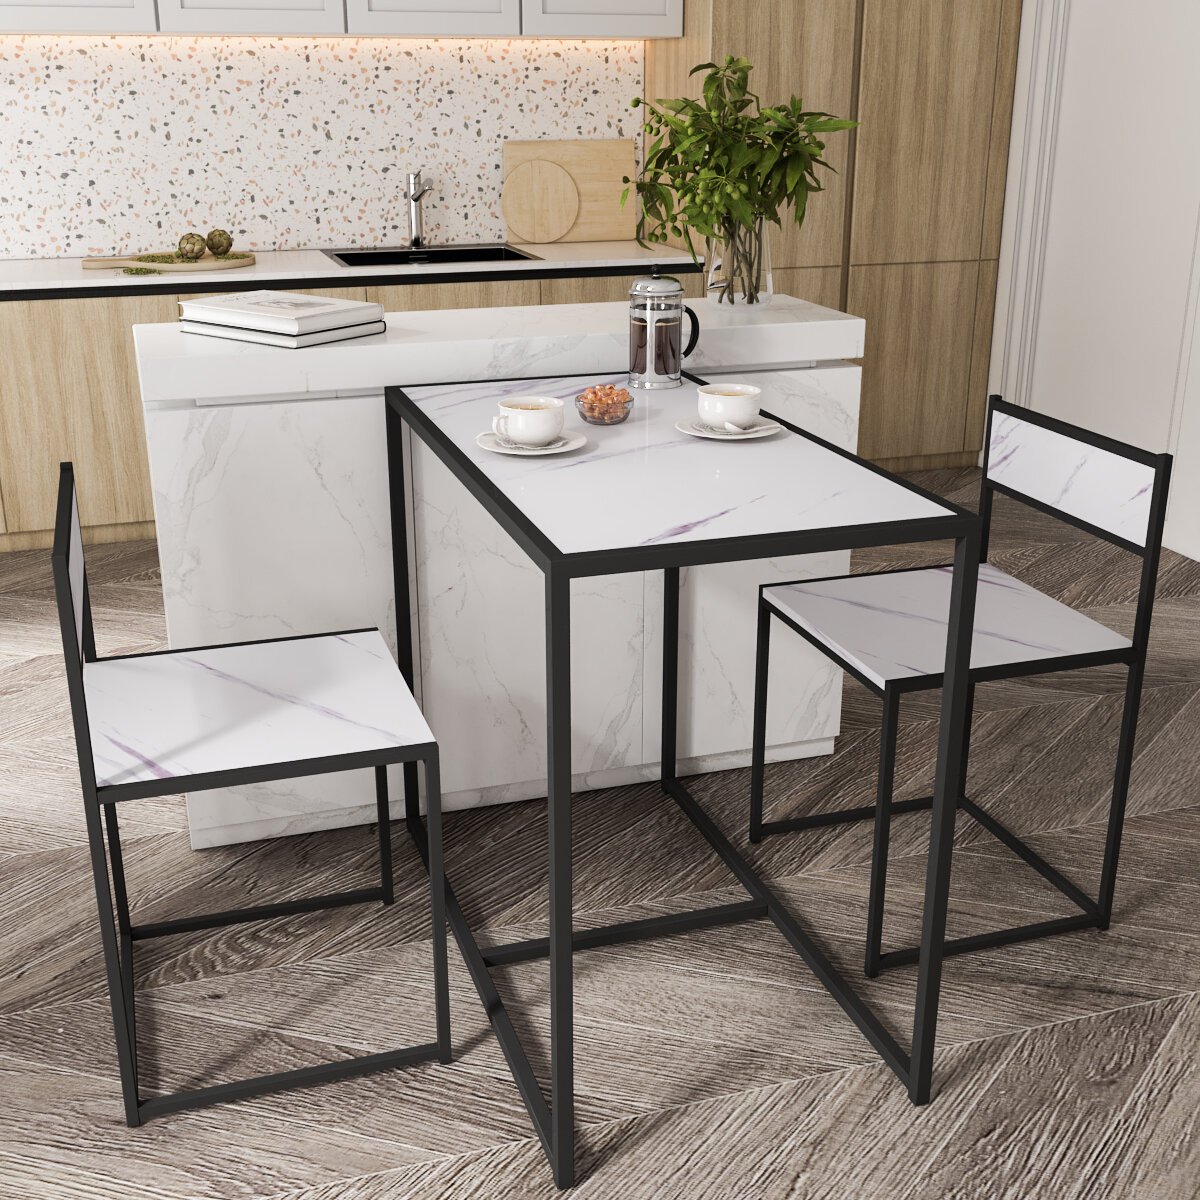 best price,dinaza,dining,wood,table,set,with,chairs,eu,discount